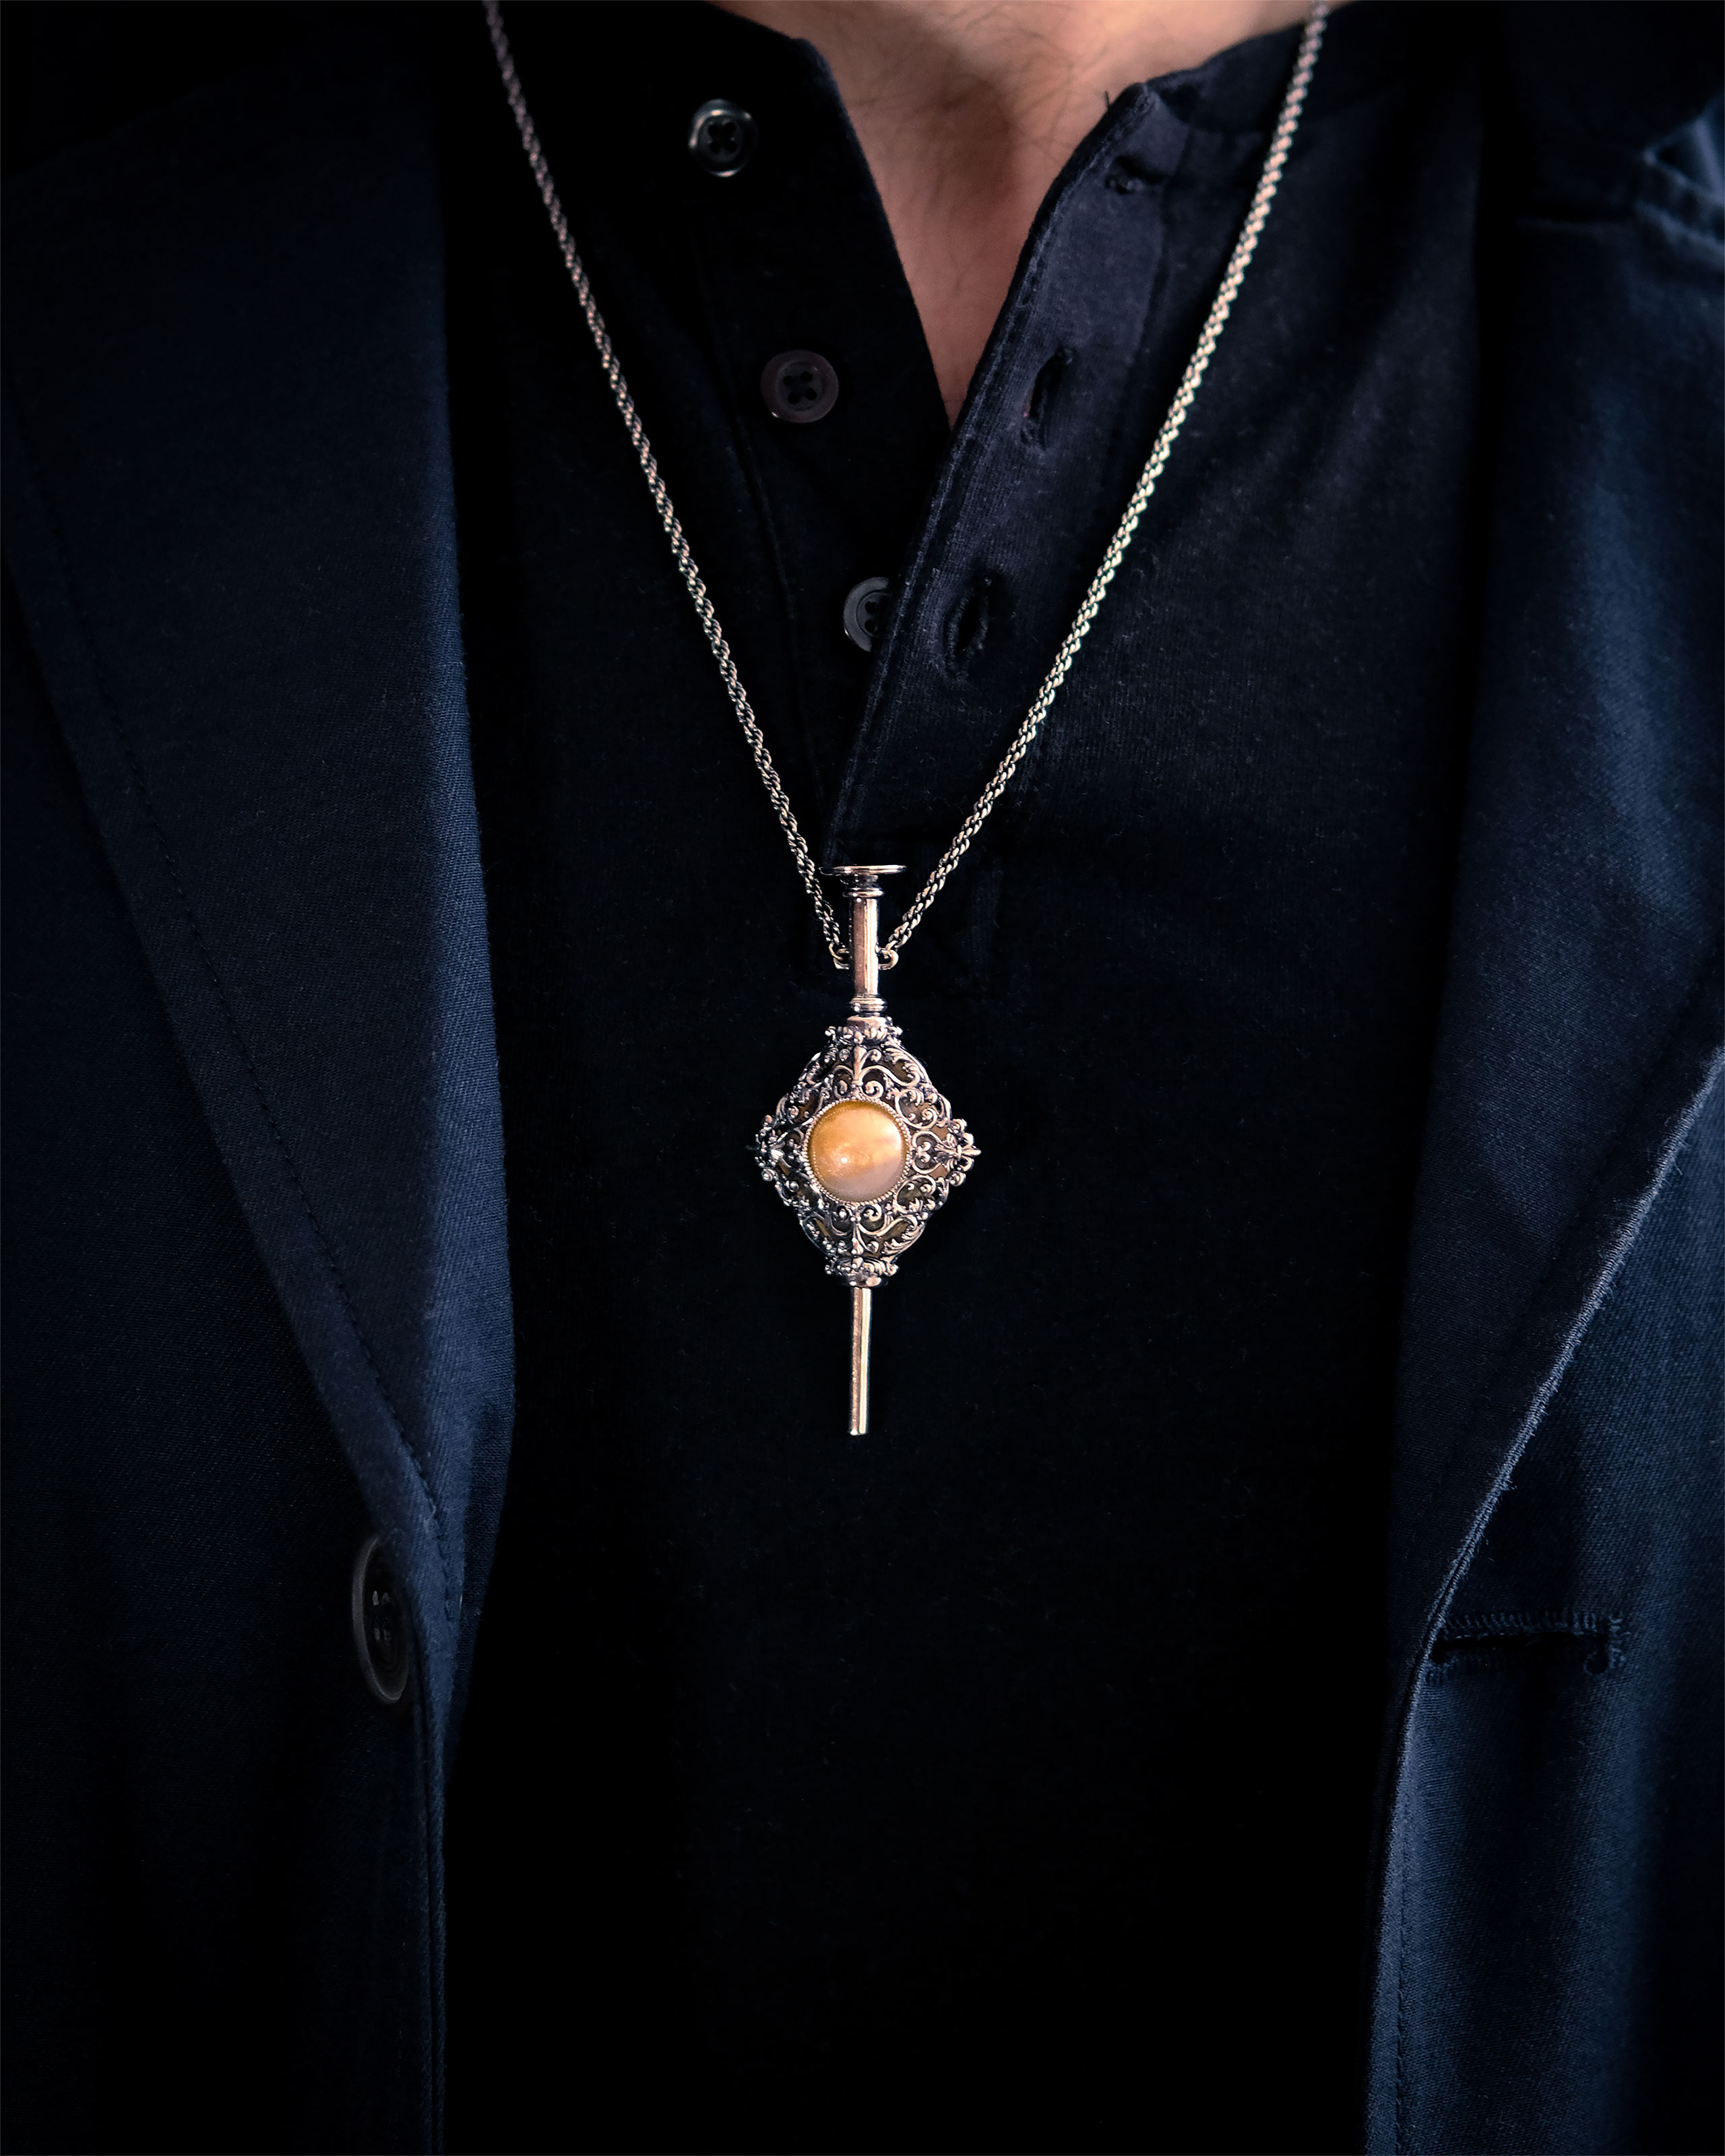 Grindelwald Blood Pact Pendant with Chain - Fantastic Beasts